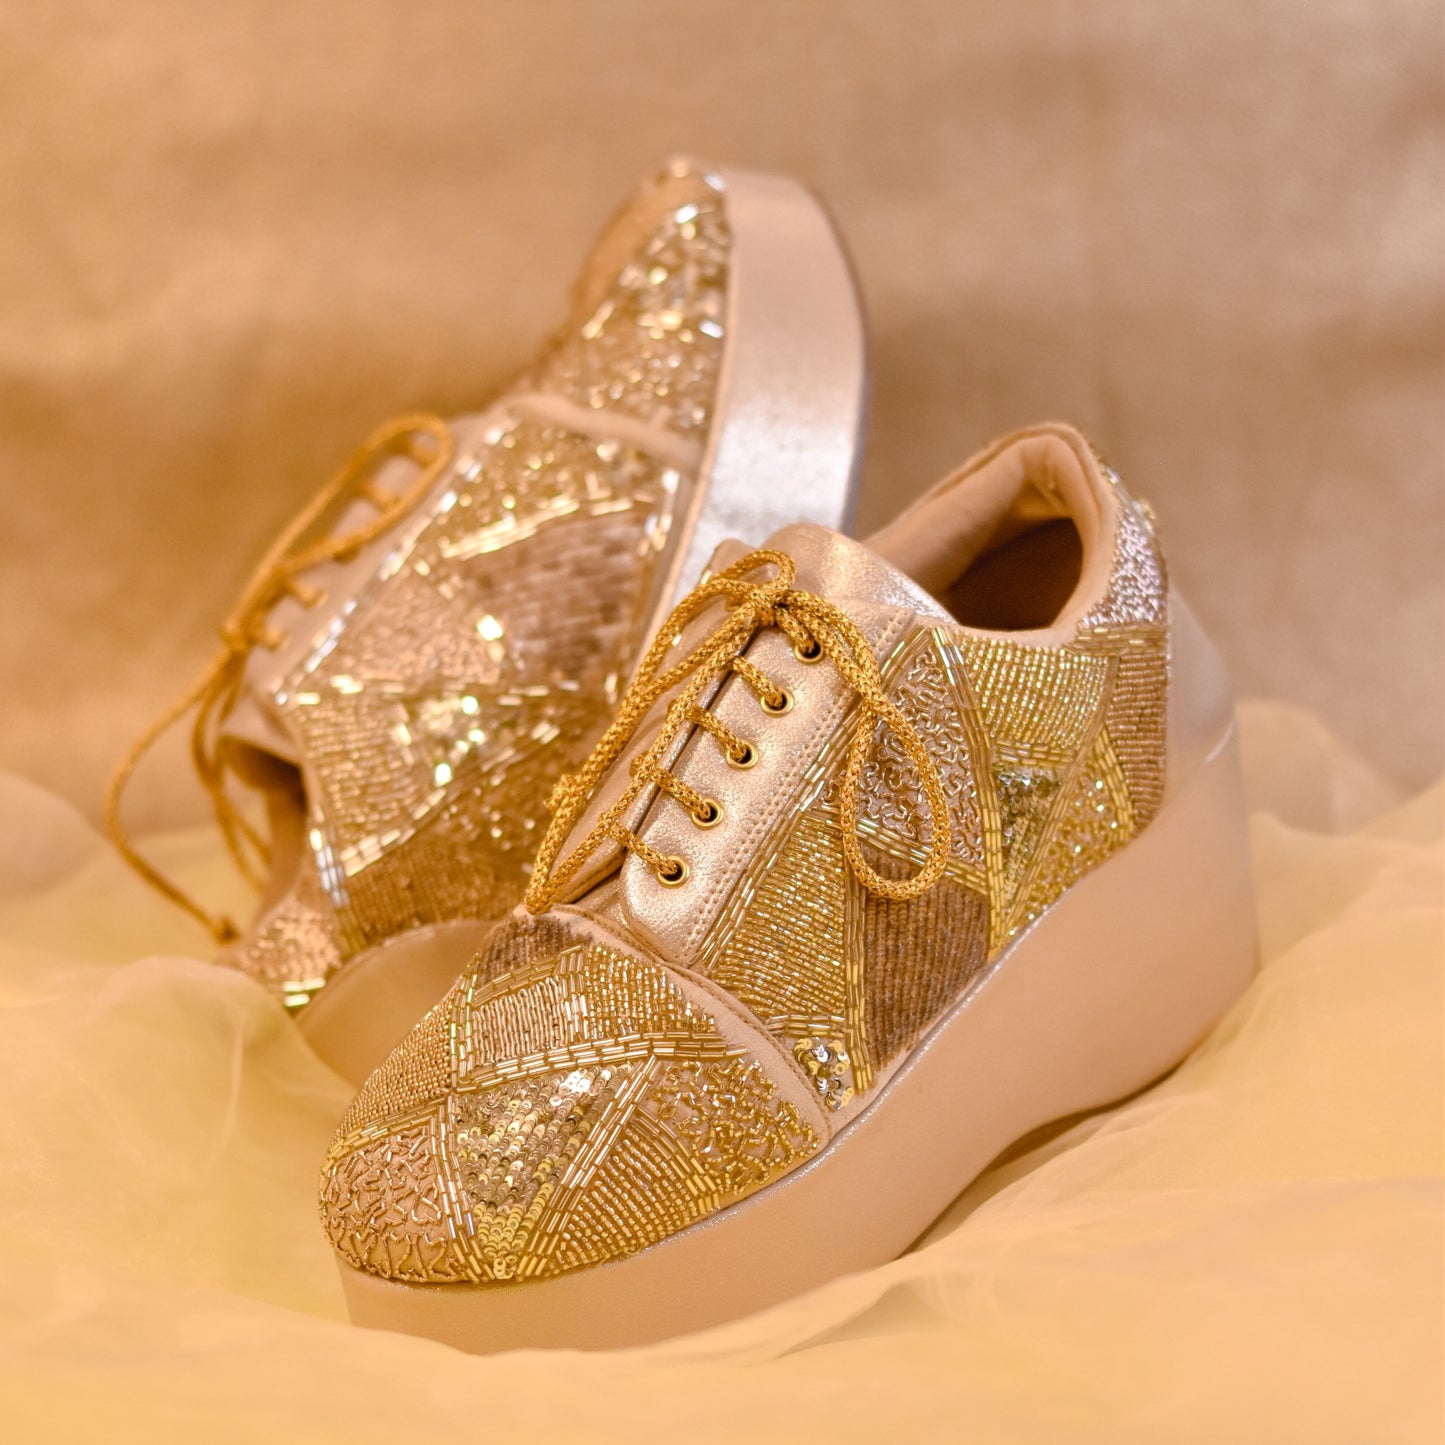 Stylish embroidered golden sneakers with heels